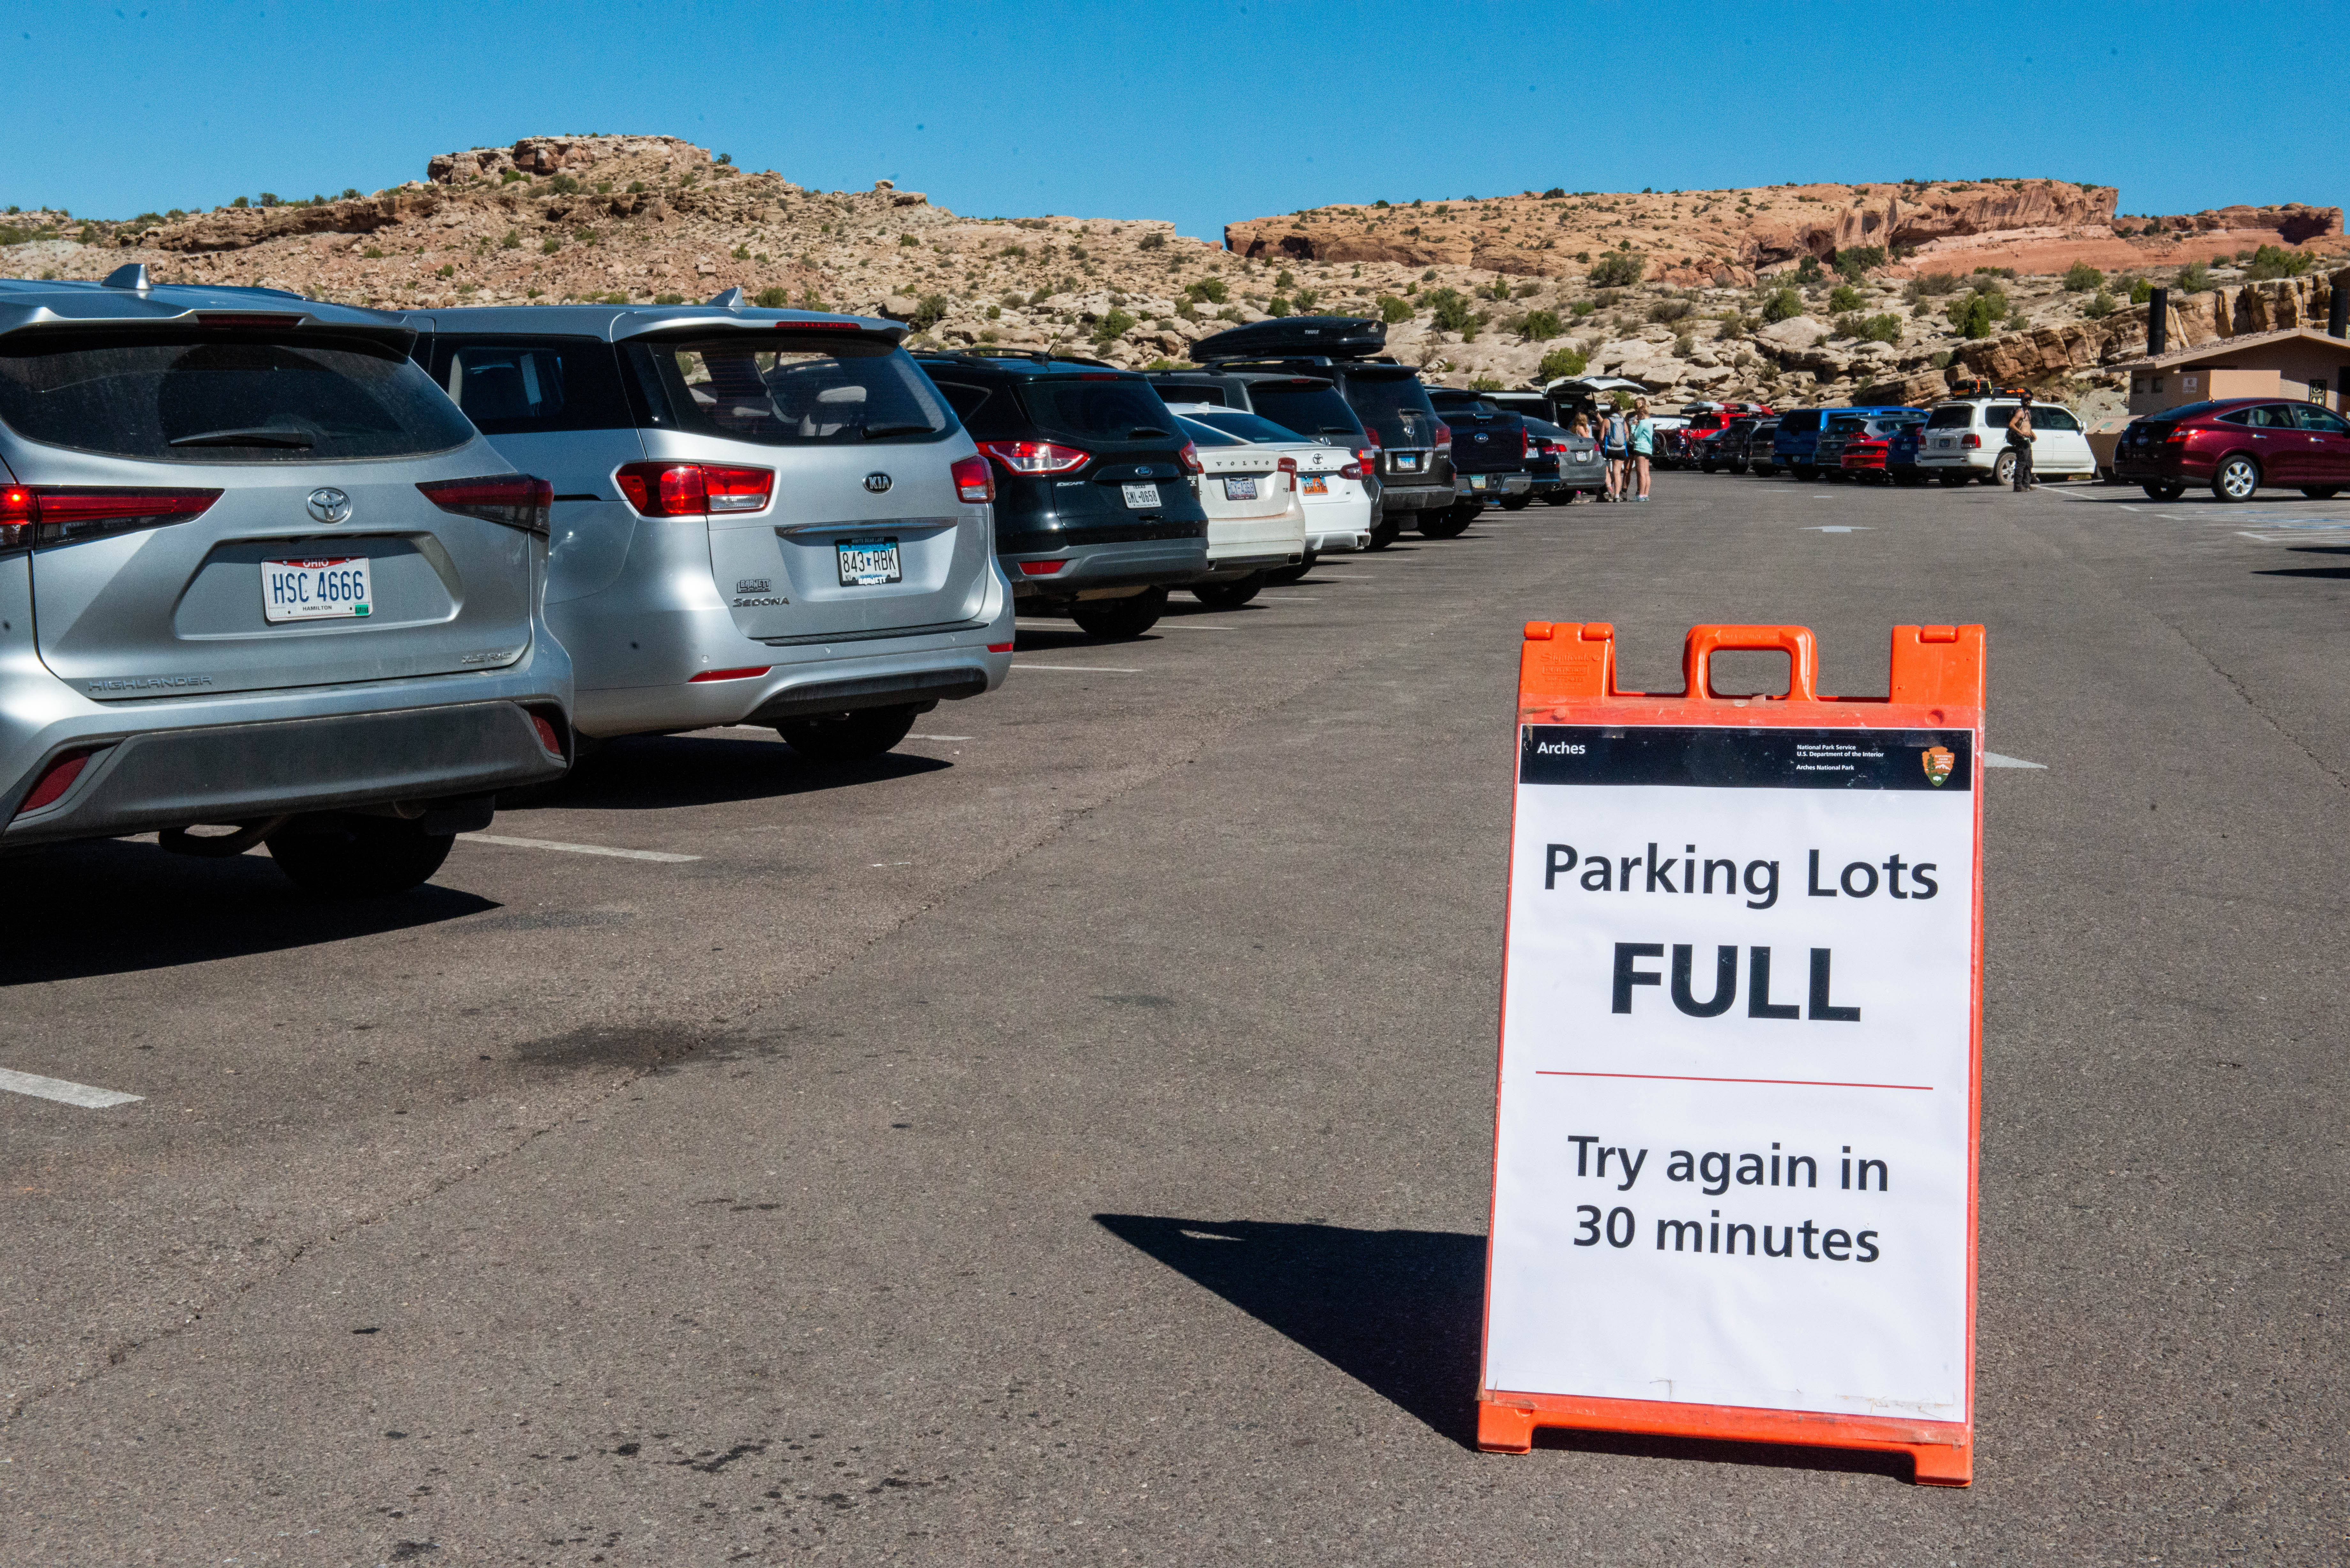 sign saying "parking lots full; try again in 30 minutes" next to row of parked cars